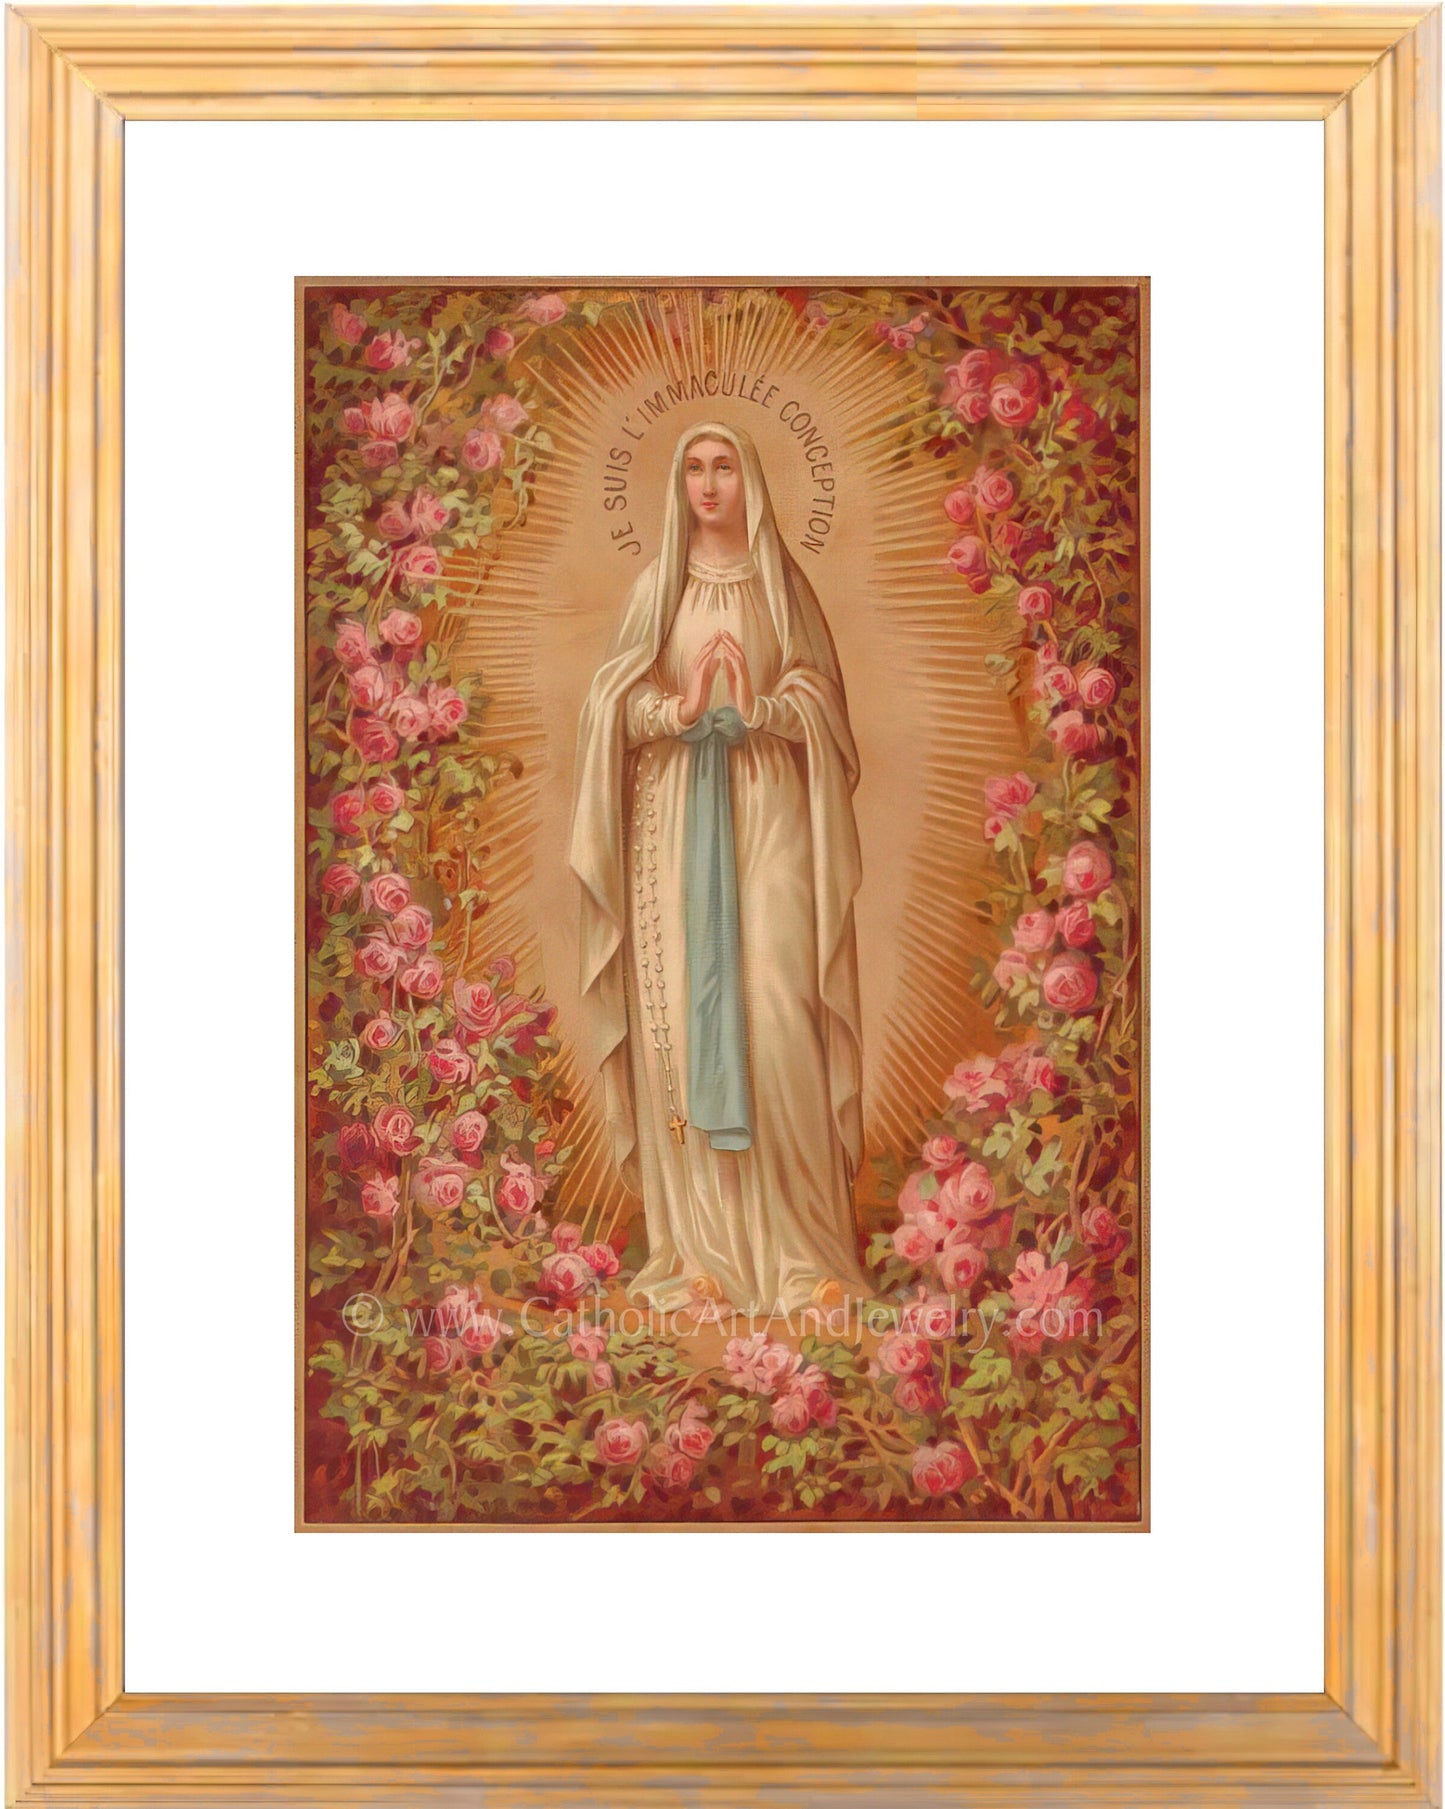 Our Lady of Lourdes Roses – based on a Vintage French Holy Card – Catholic Art Print